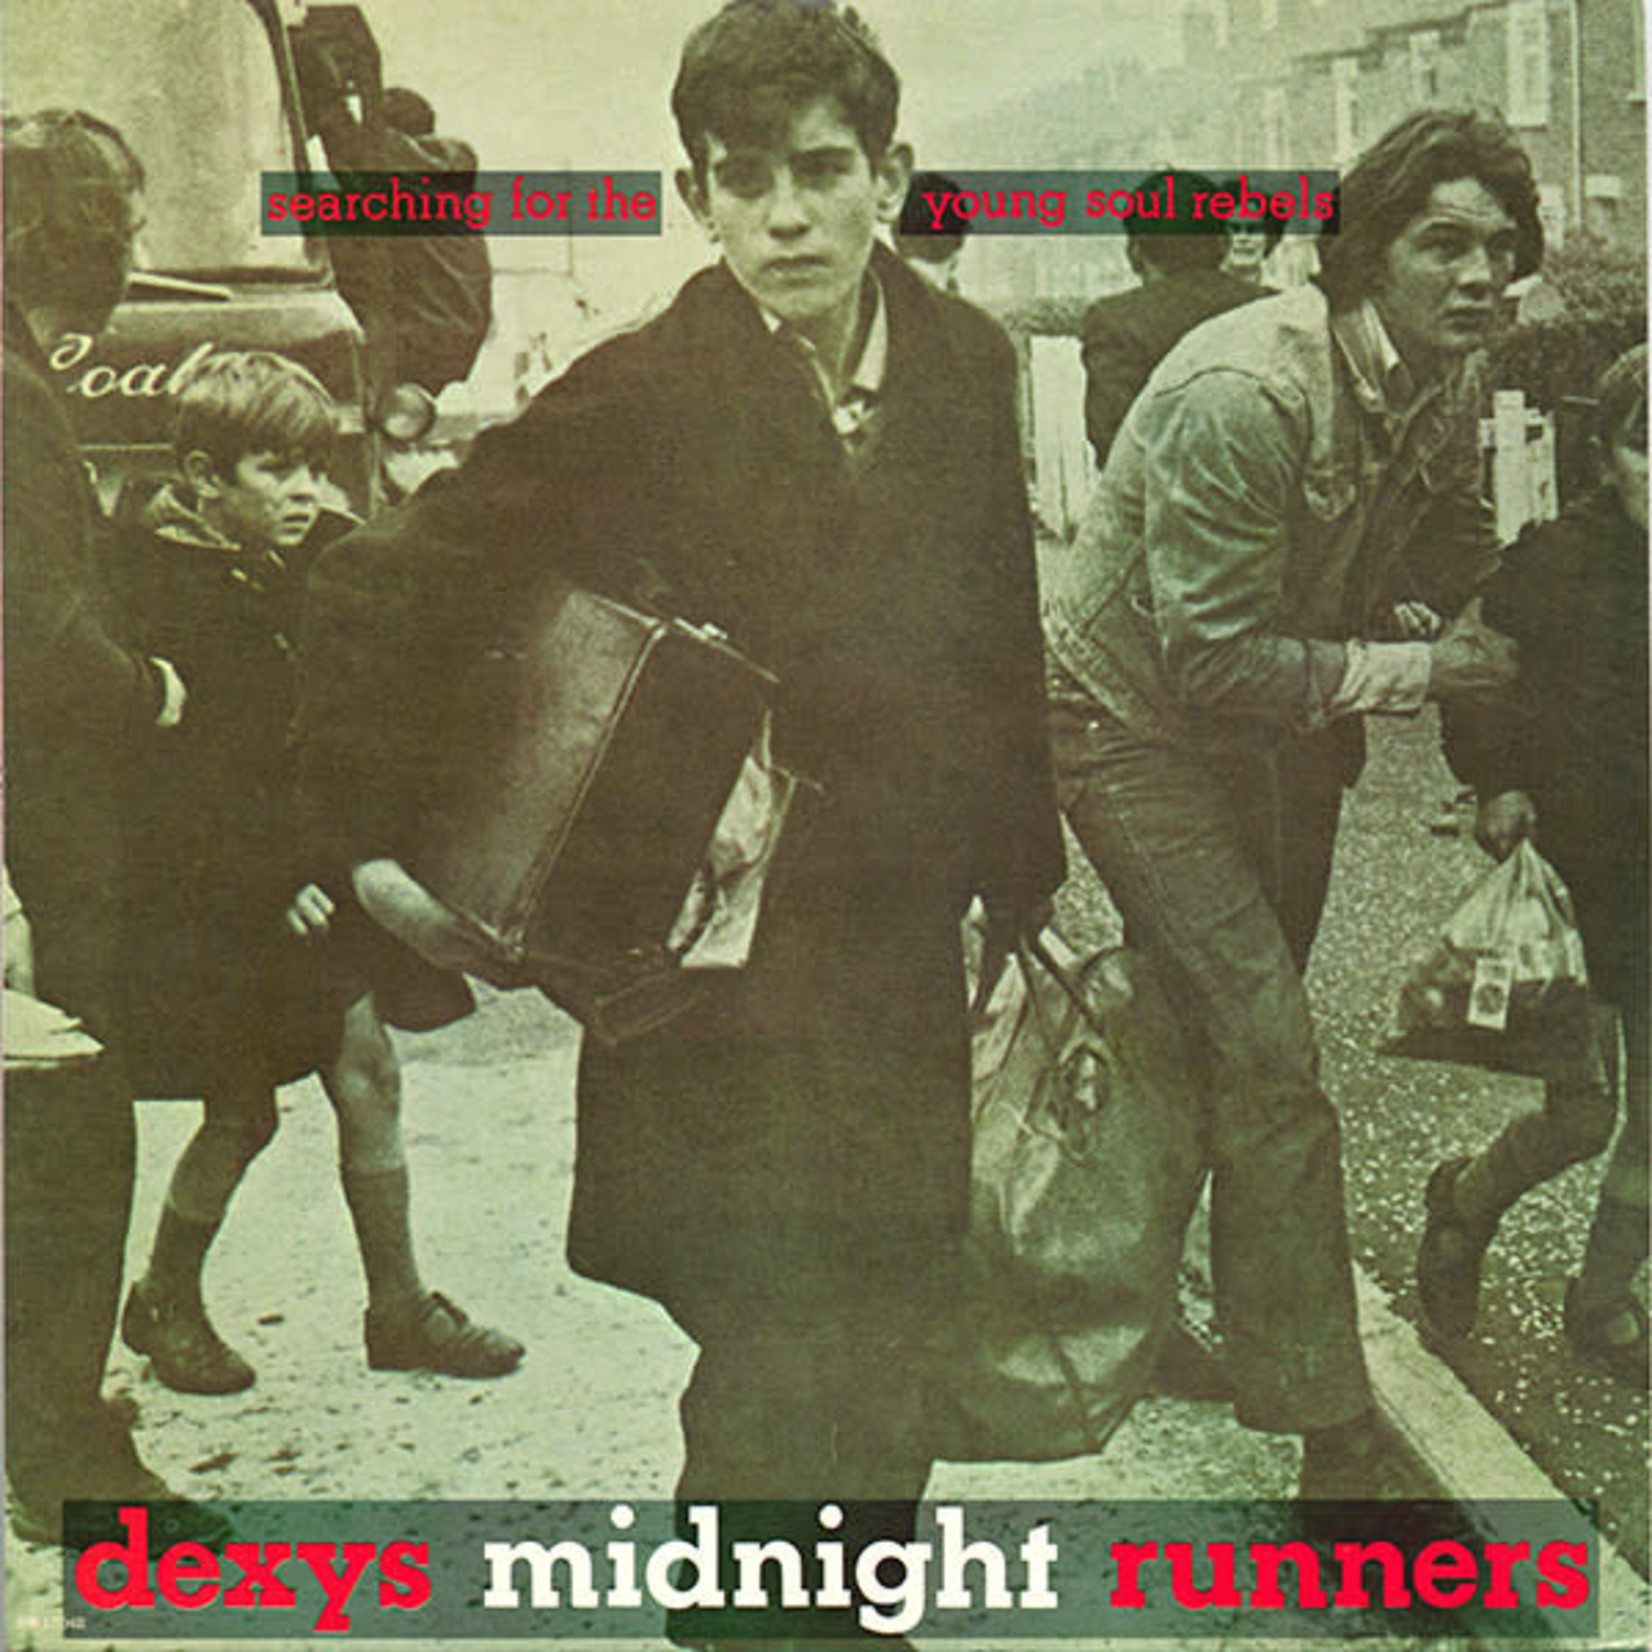 [Vintage] Dexy's Midnight Runners - Searching for the Young Soul Rebels